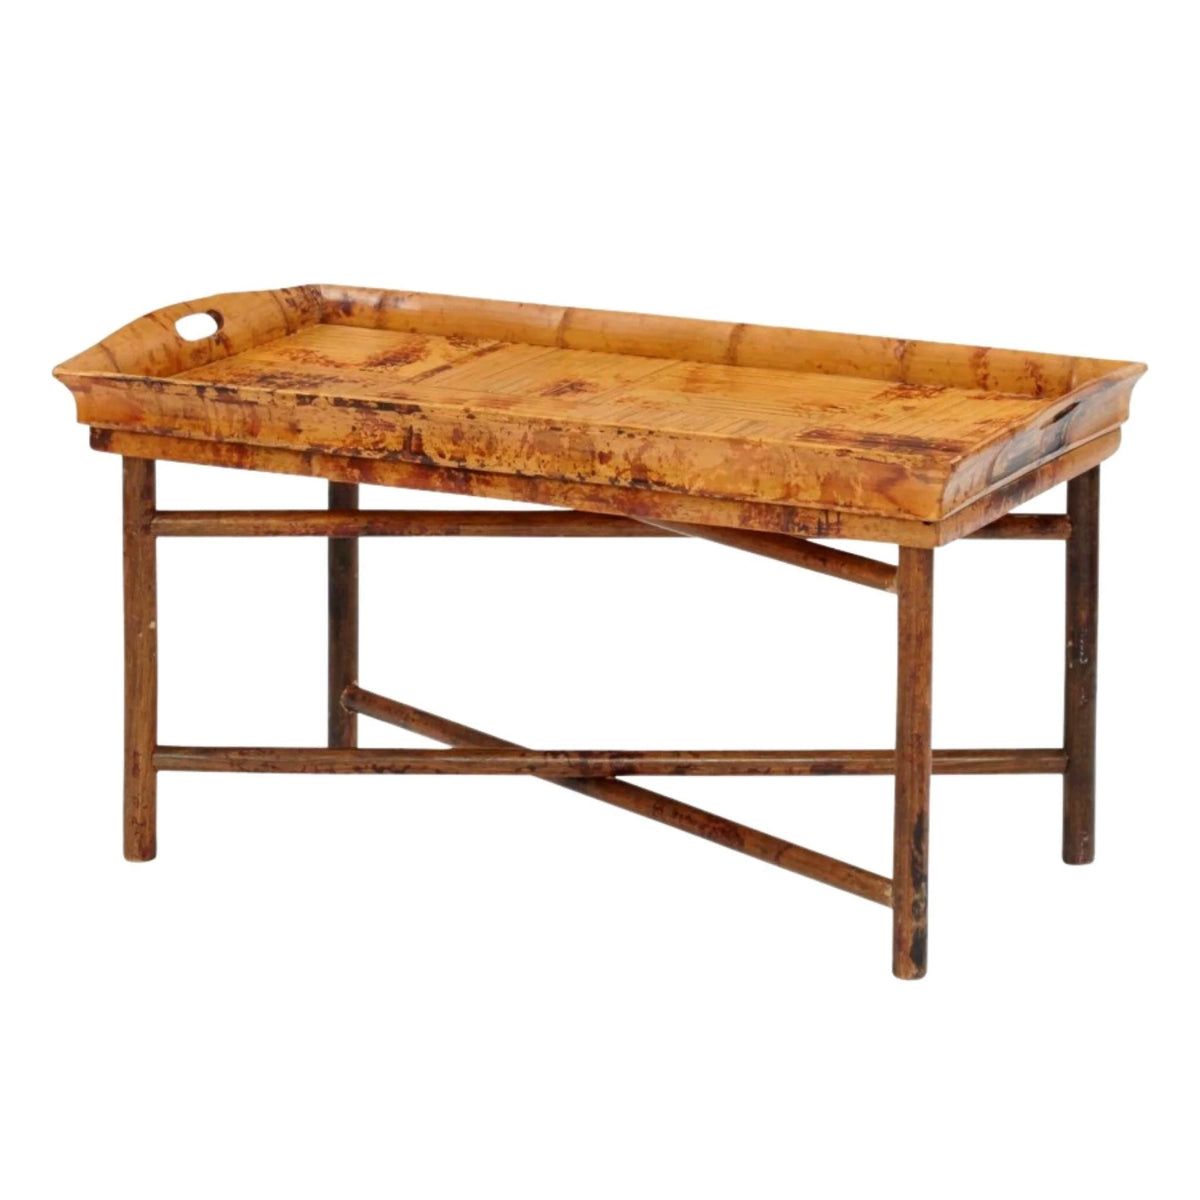 Tray Style Butler-Coffee Table with a Tortoise Matte Finish | The Well Appointed House, LLC